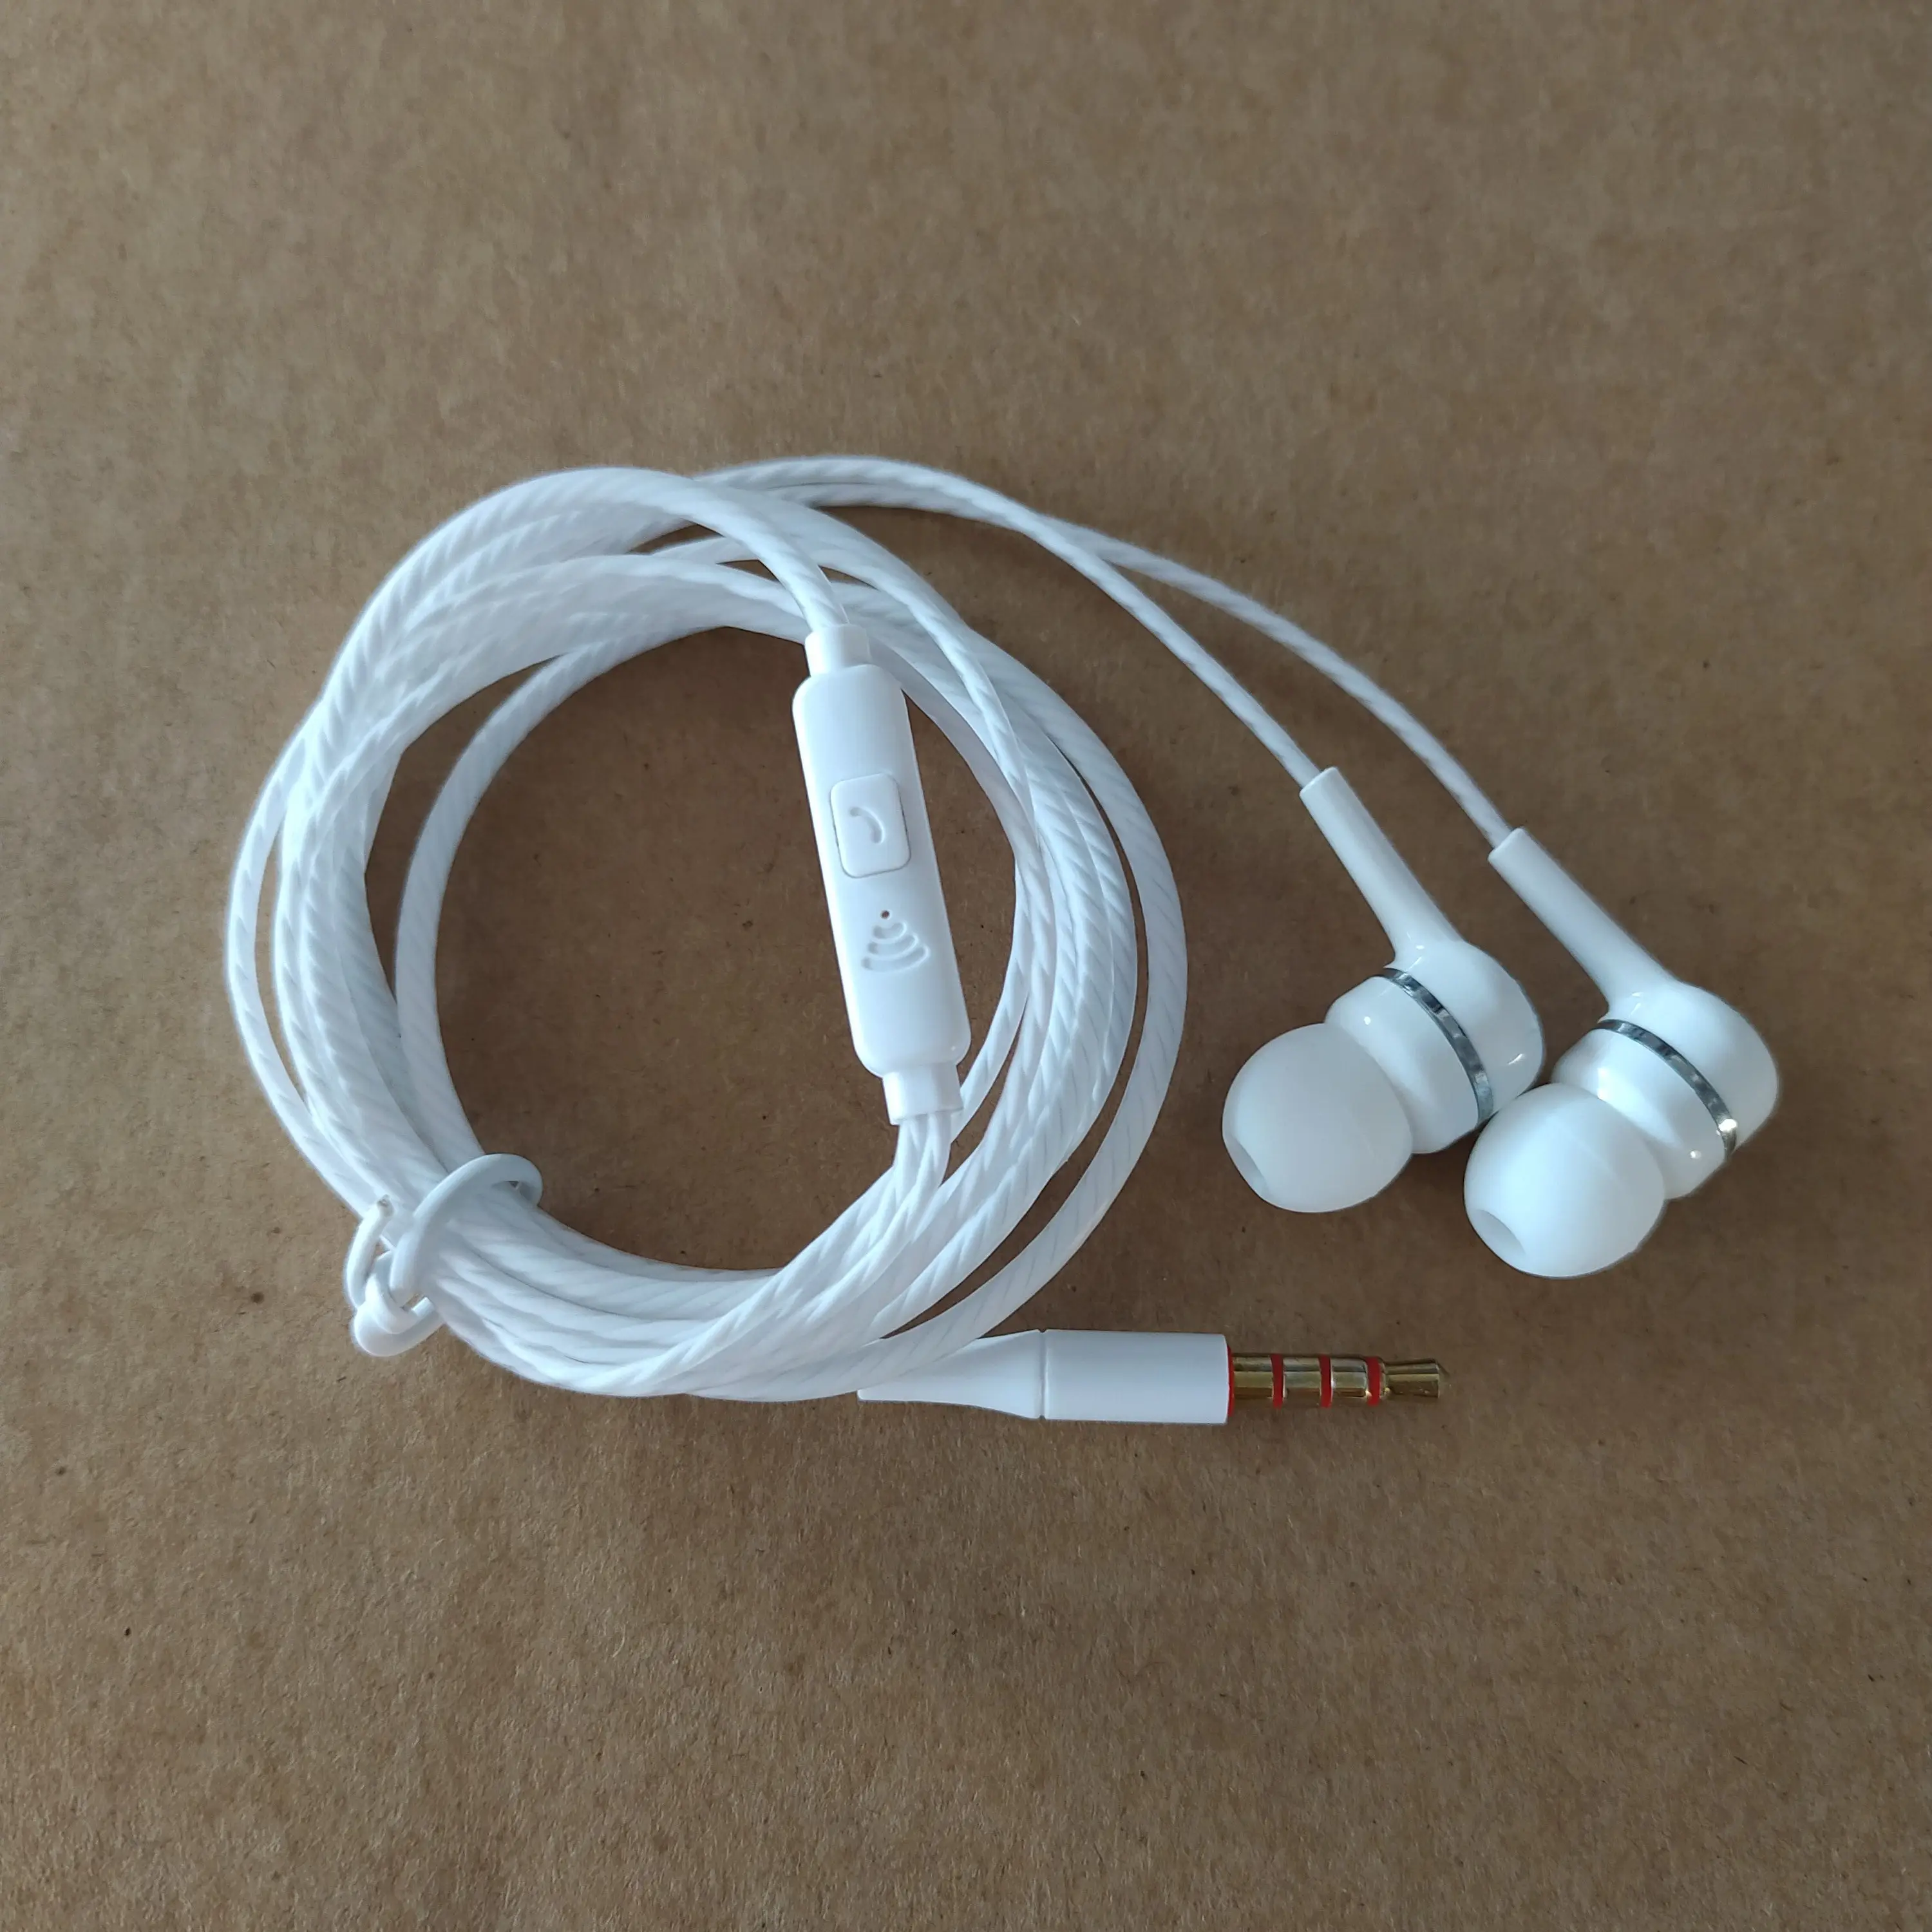 Universal Wire Headset For Apple Android Smart Call No volume control In-ear Mobile Phone Headset